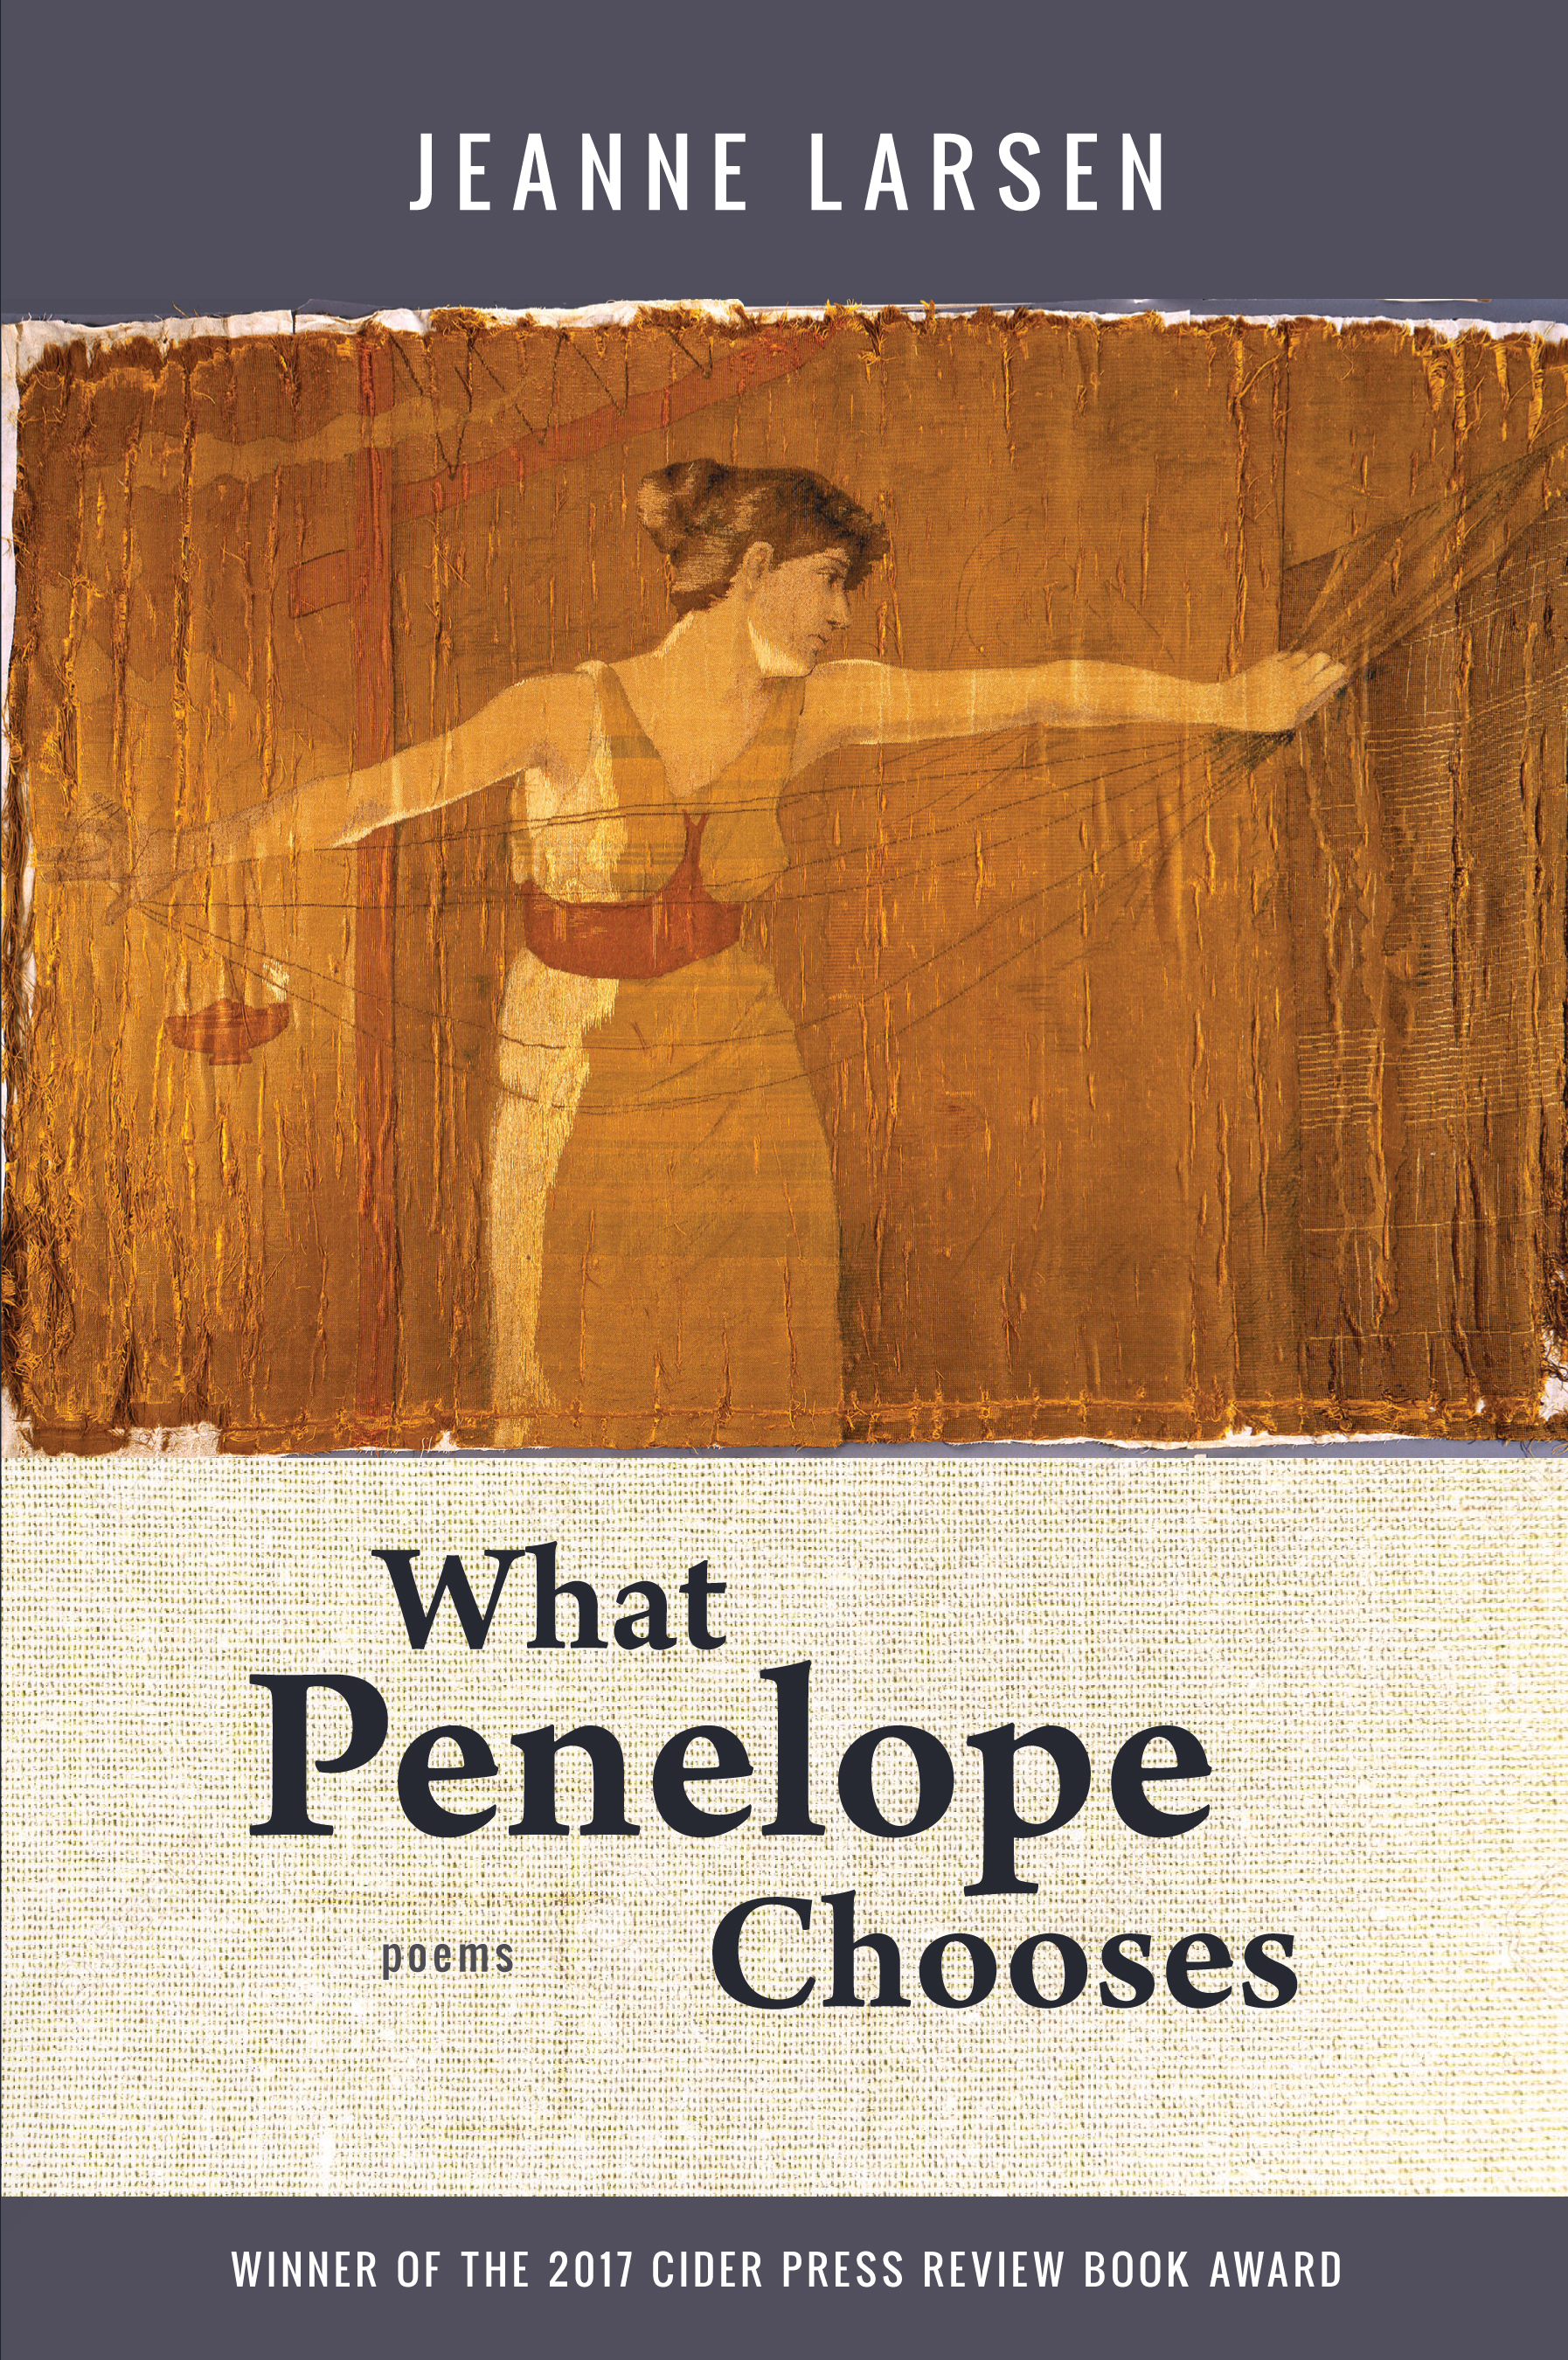 image shows cover of  book, What Penelope Chooses: Poems